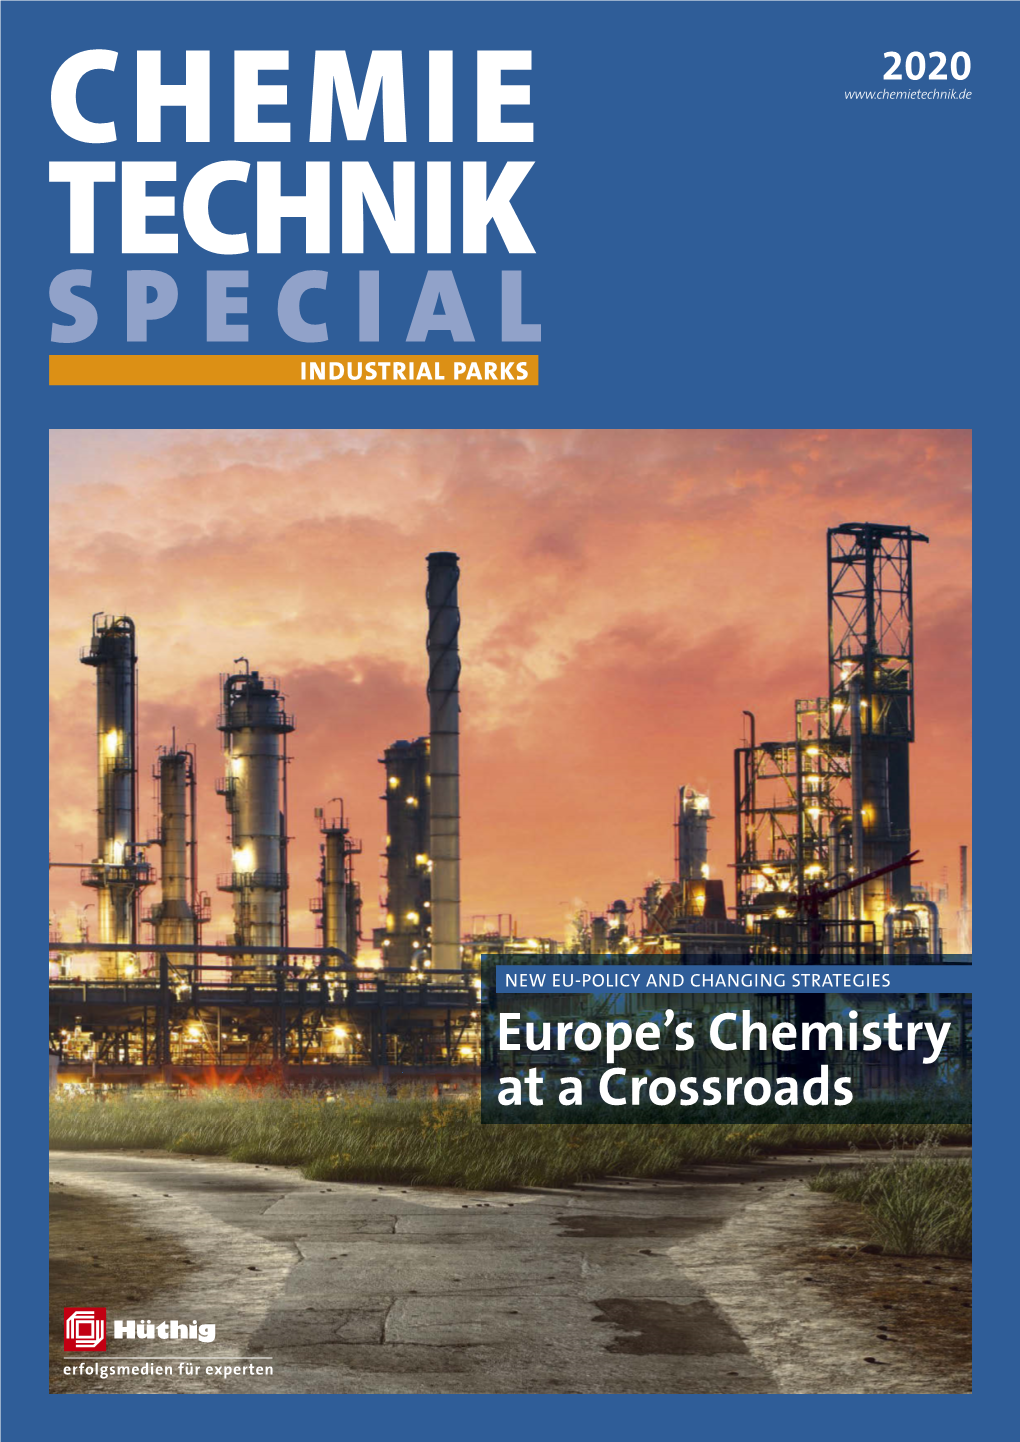 Europe's Chemistry at a Crossroads